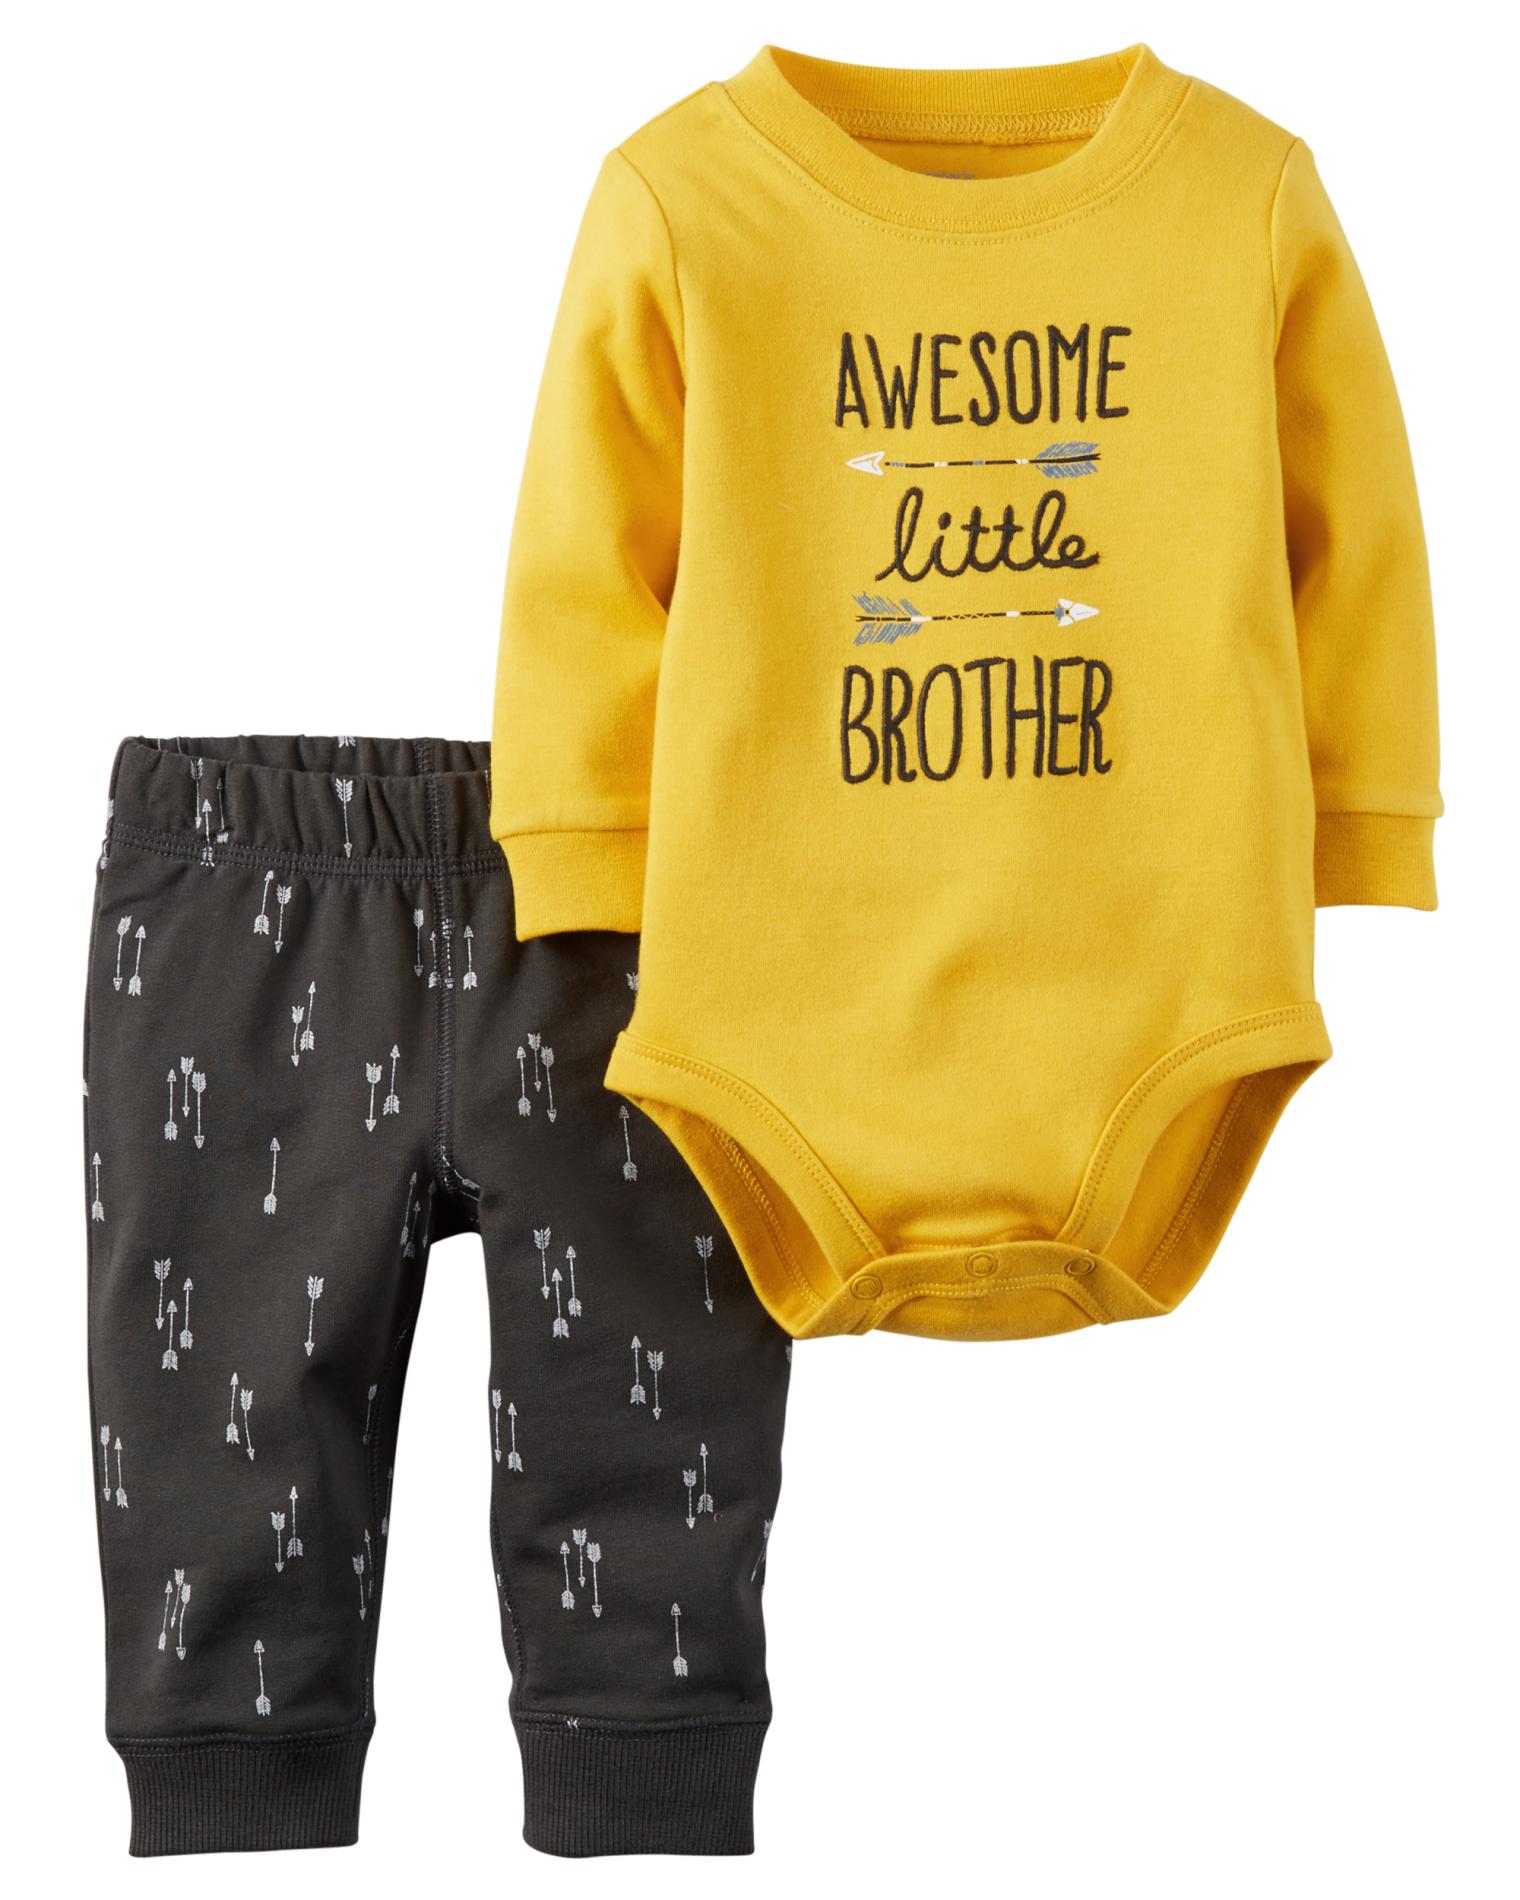 Carter's Newborn & Infant Boys' Bodysuit & Pants - Awesome Little Brother